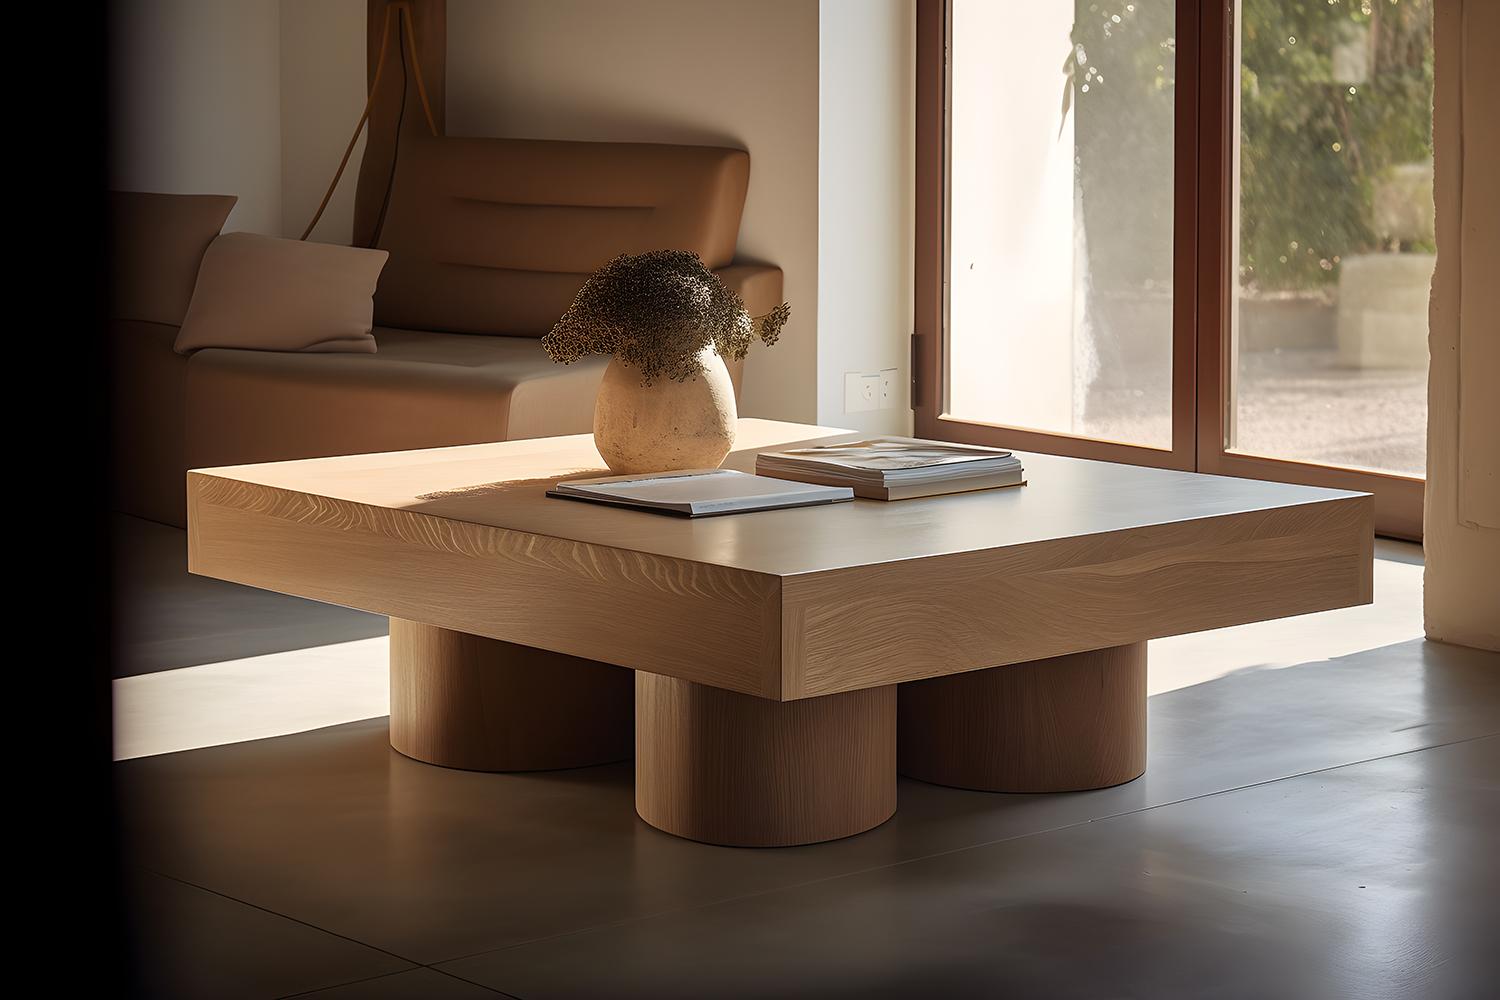 Mexican Brutalist Square Coffee Table in Warm Wood Veneer, Podio by NONO For Sale